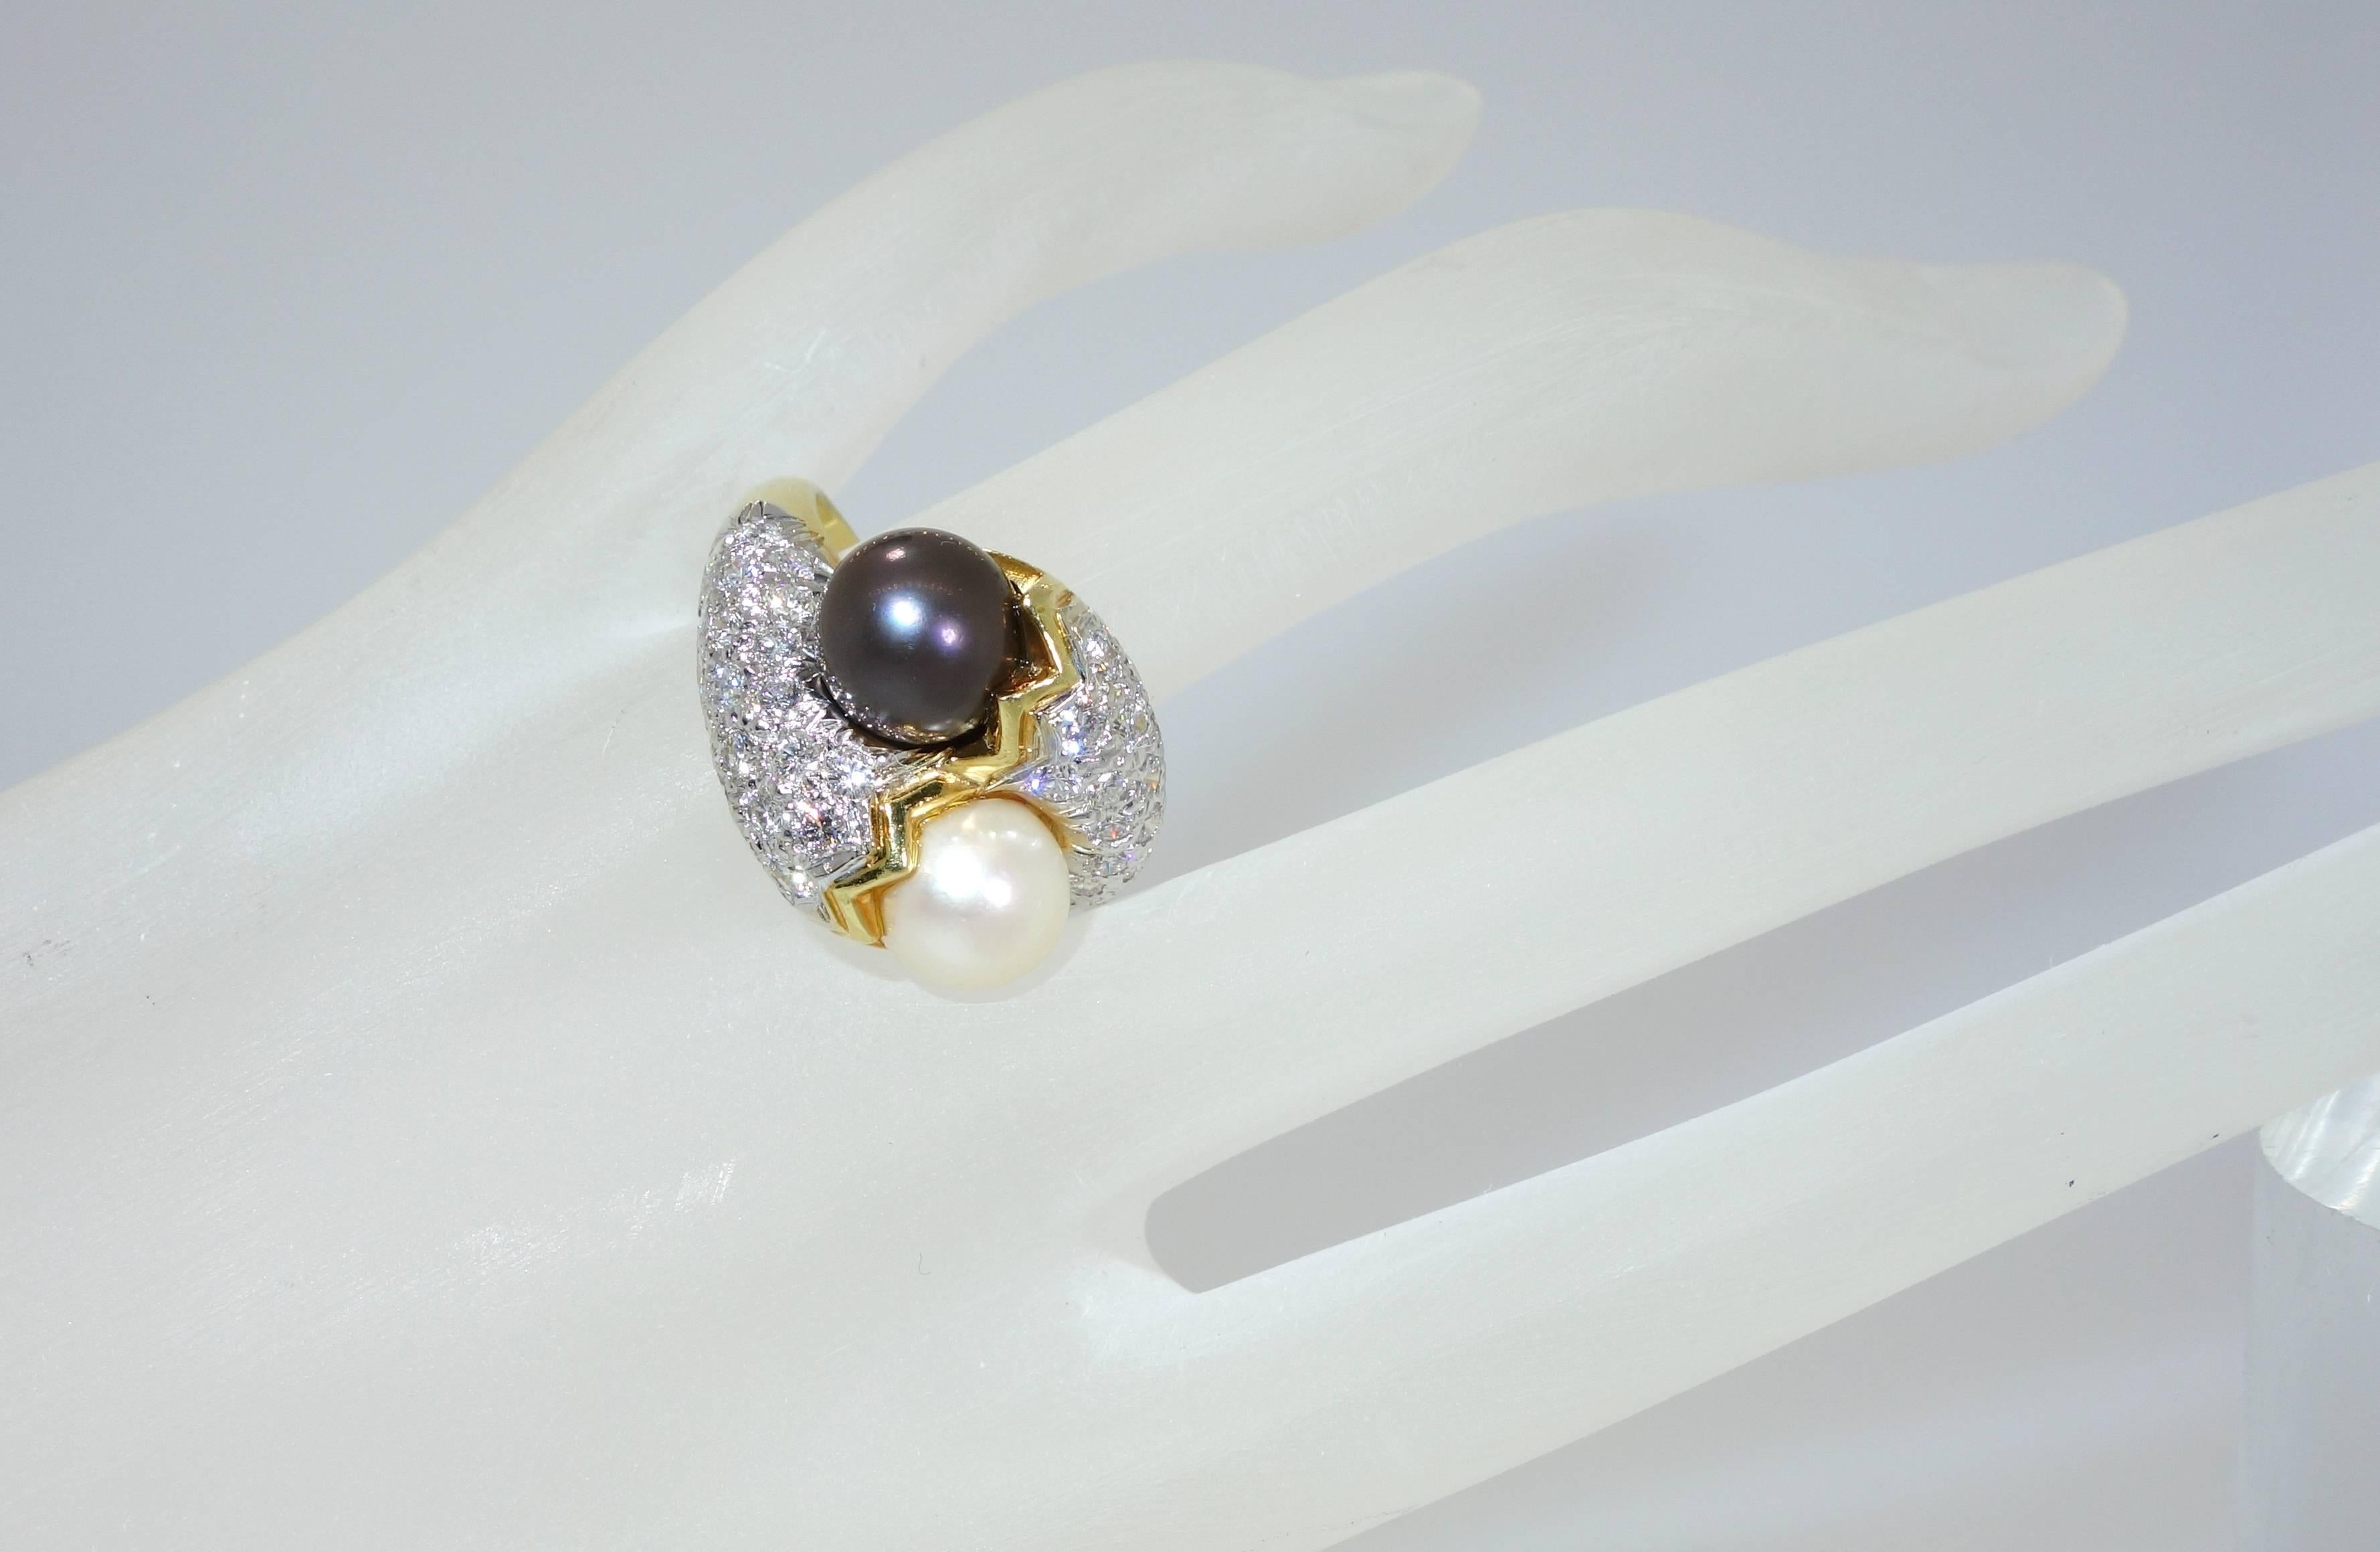 18K yellow gold possessing two fine pearls - black and white with 42 fine white diamonds which total approximately 1.25 cts.  These diamonds are all well cut, white and bright.  The ring is numbered 30353, unfortunately the name has been polished